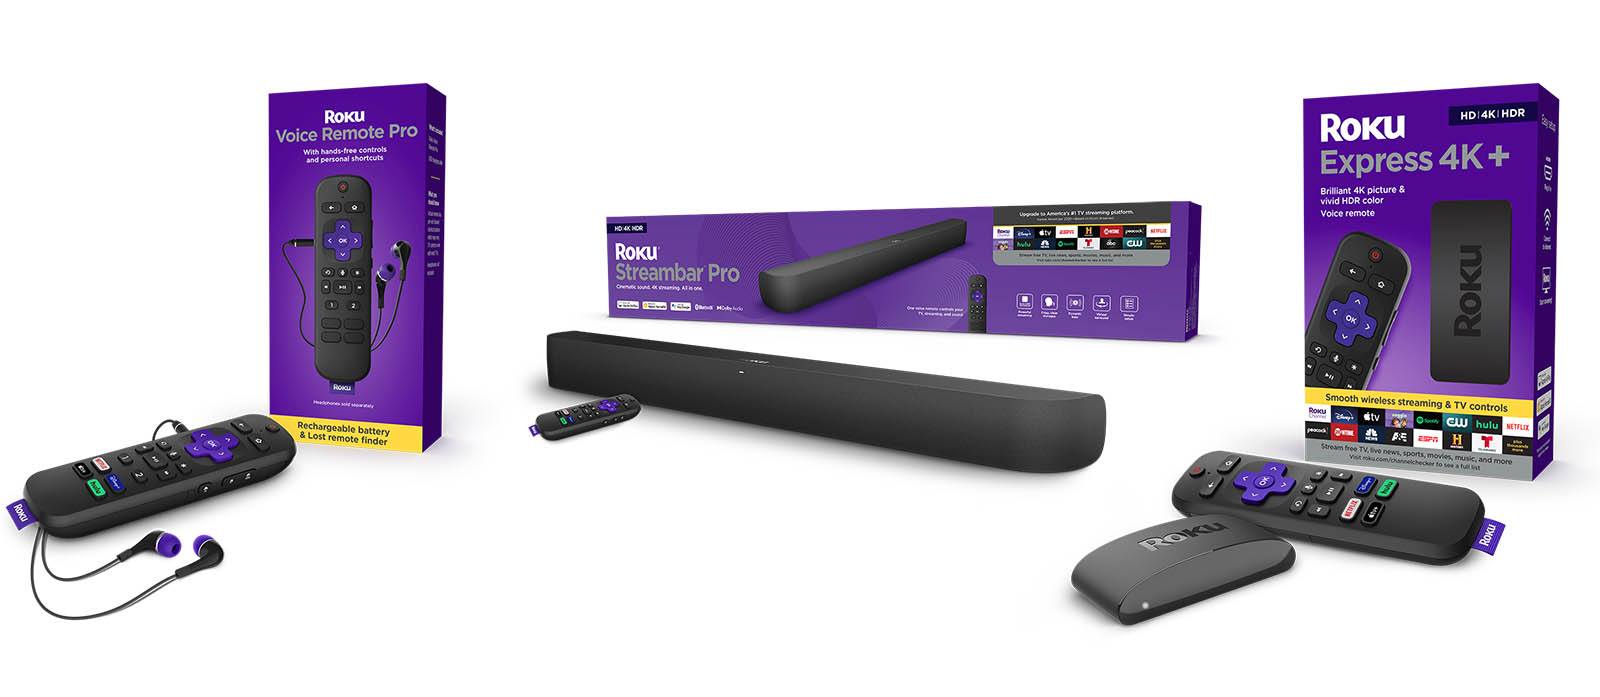 Roku’s Spring 2021 Hardware Lineup Includes Express 4K+, Voice Remote Pro, Streambar Pro